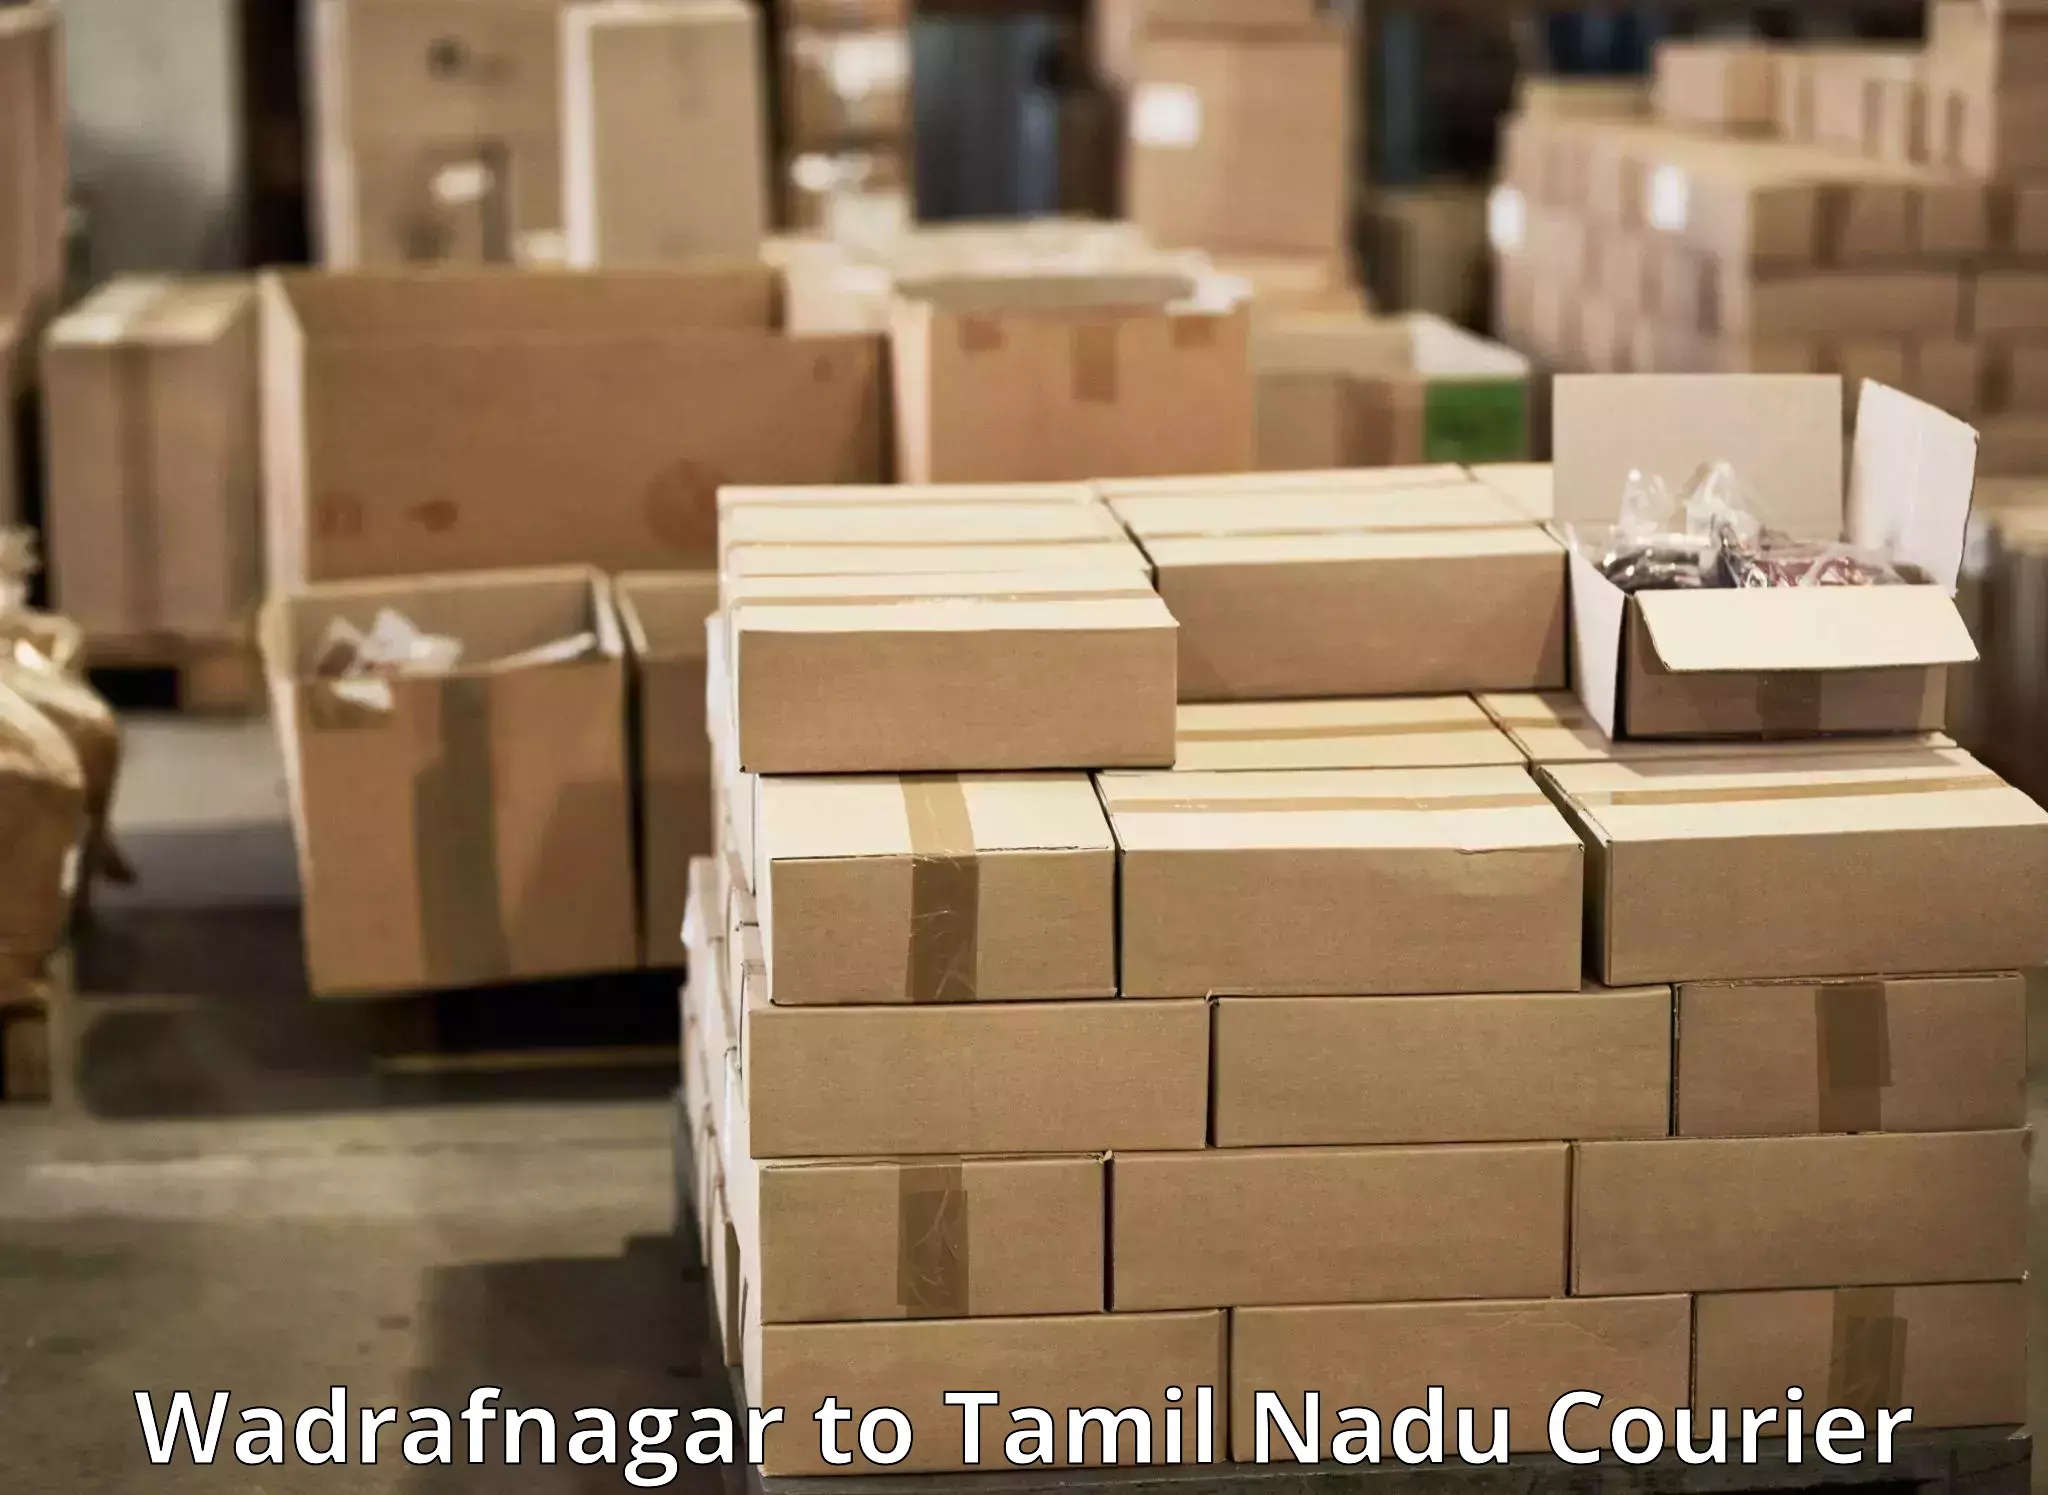 Automated shipping processes Wadrafnagar to Theni